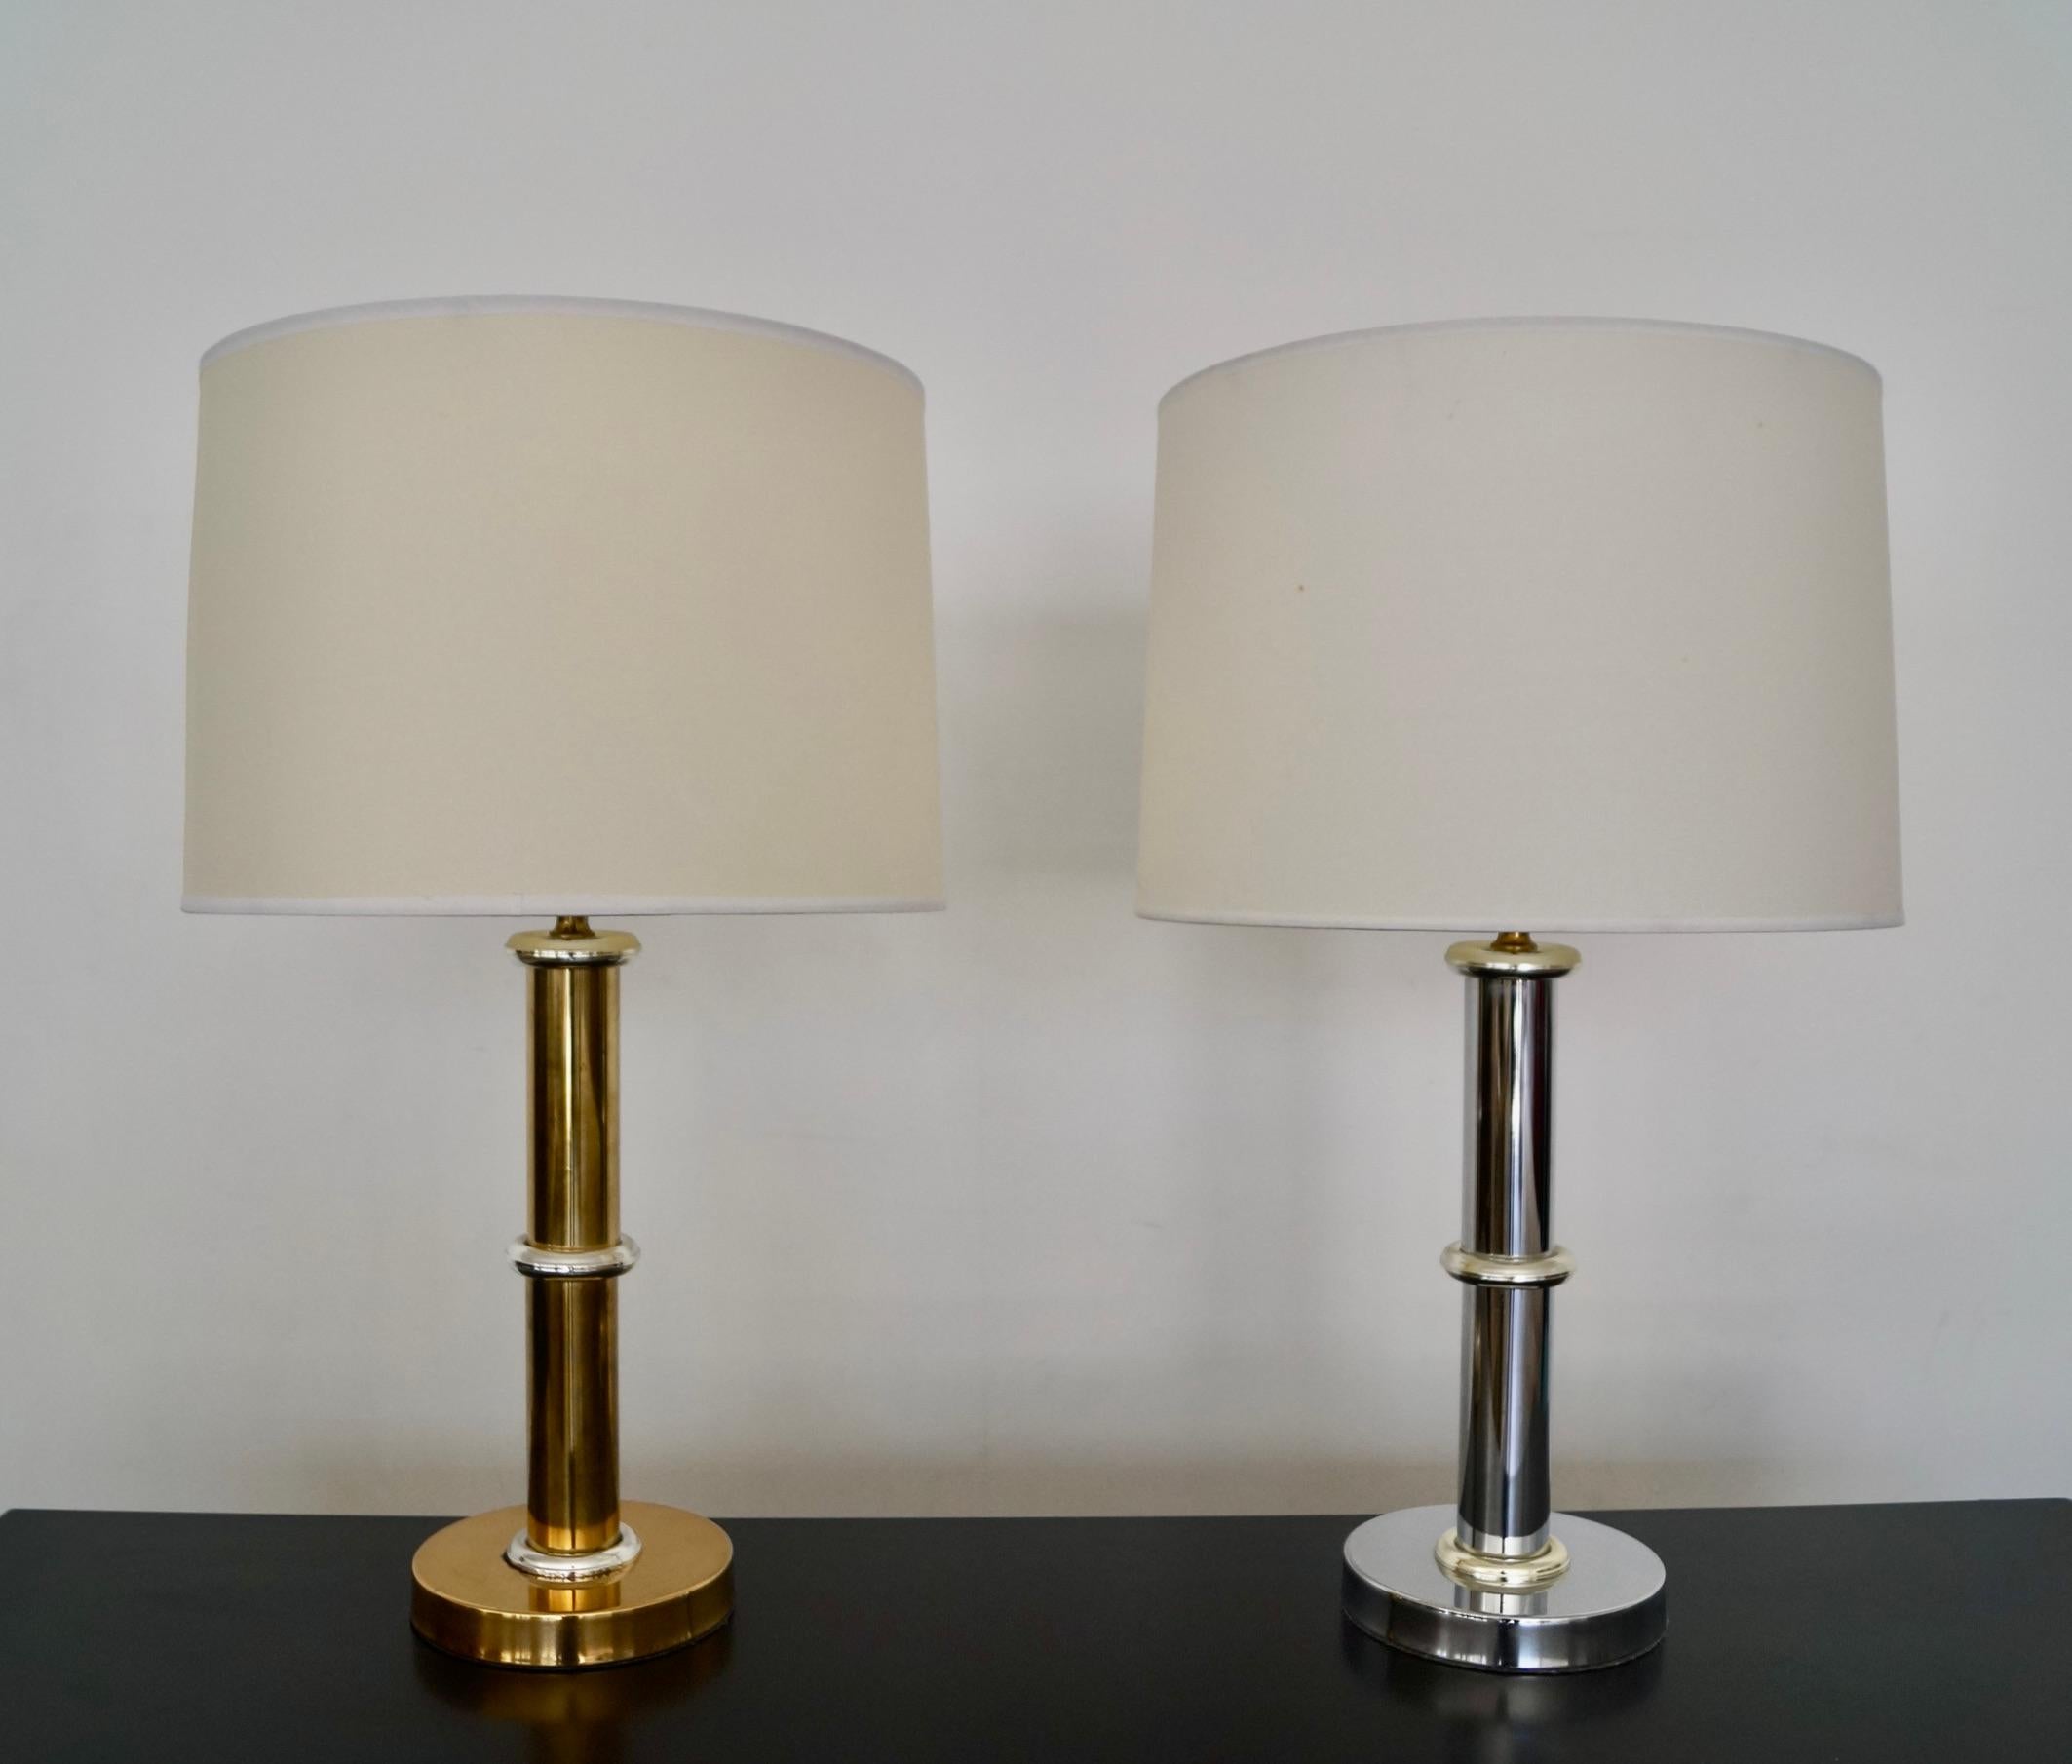 Vintage Mid-century Modern table lamps for sale. From the 1950’s, and in complimenting chrome and brass. One lamp is chrome with brass rings and the brass lamp has chrome rings on the stem. They’re both in working order, and in great condition. They